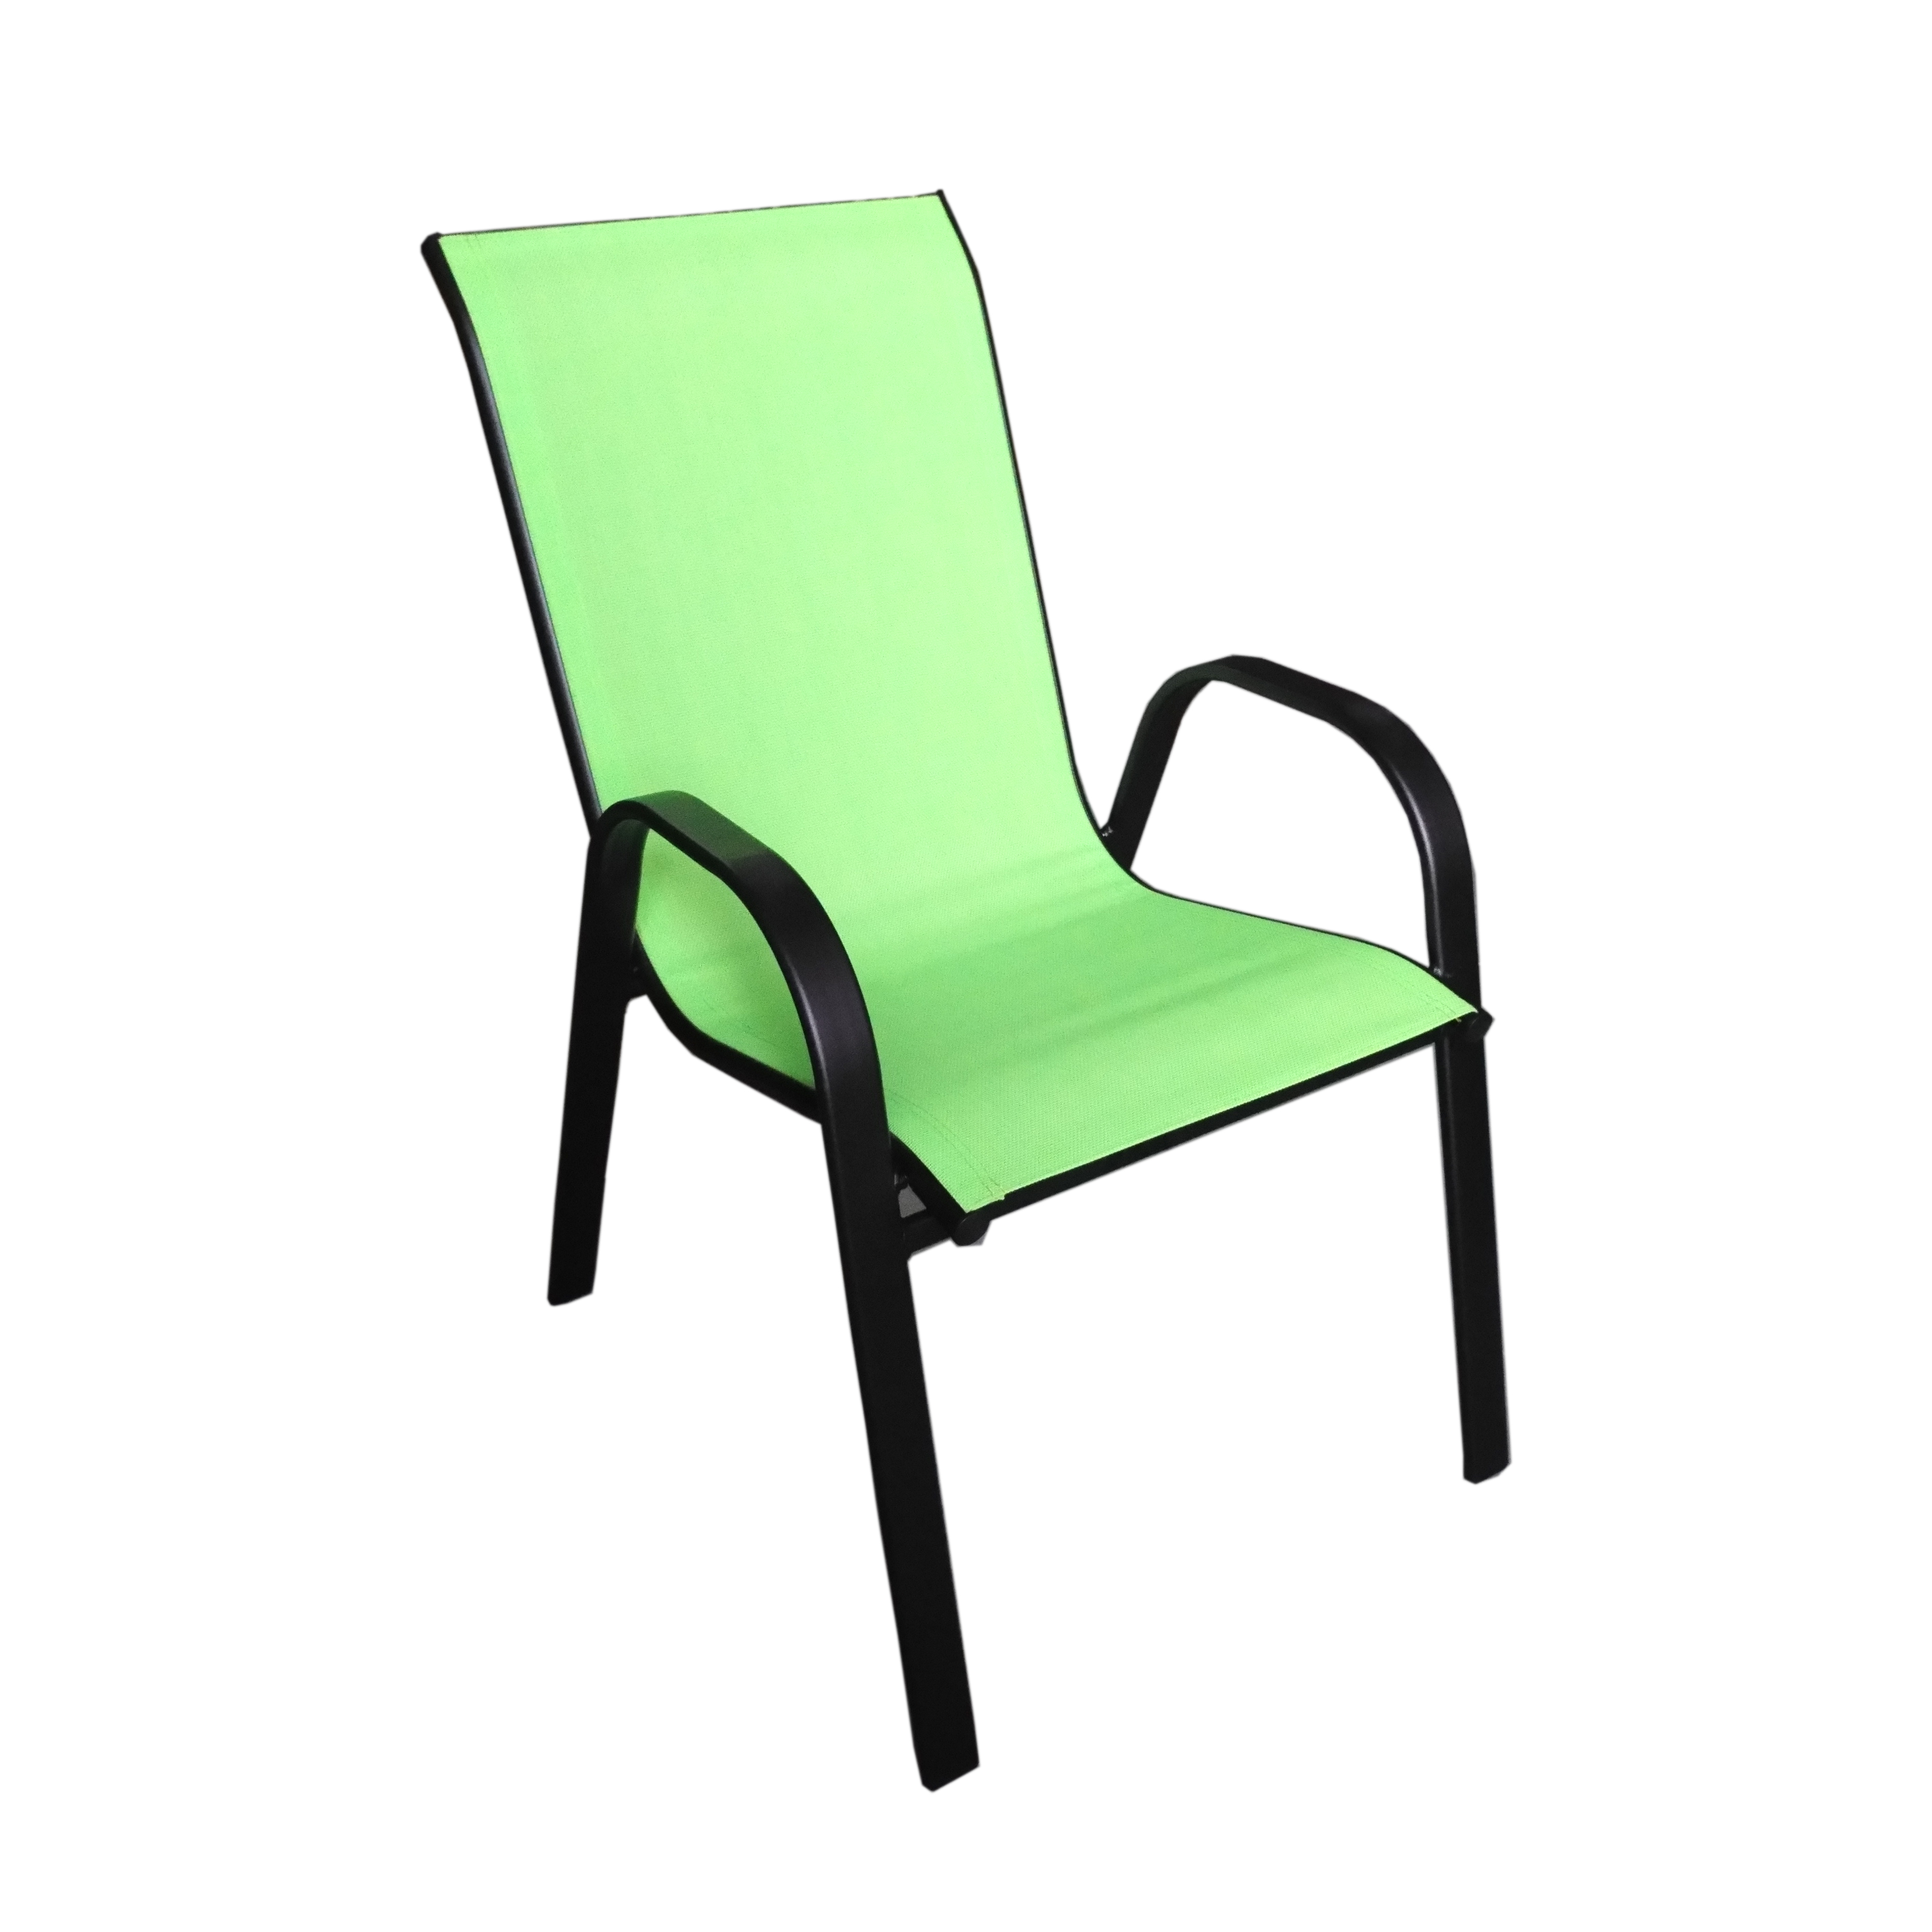 Uplion Wholesale Textile Chair Fabric Stainless Steel Frame Mesh Outdoor Furniture Garden Chair